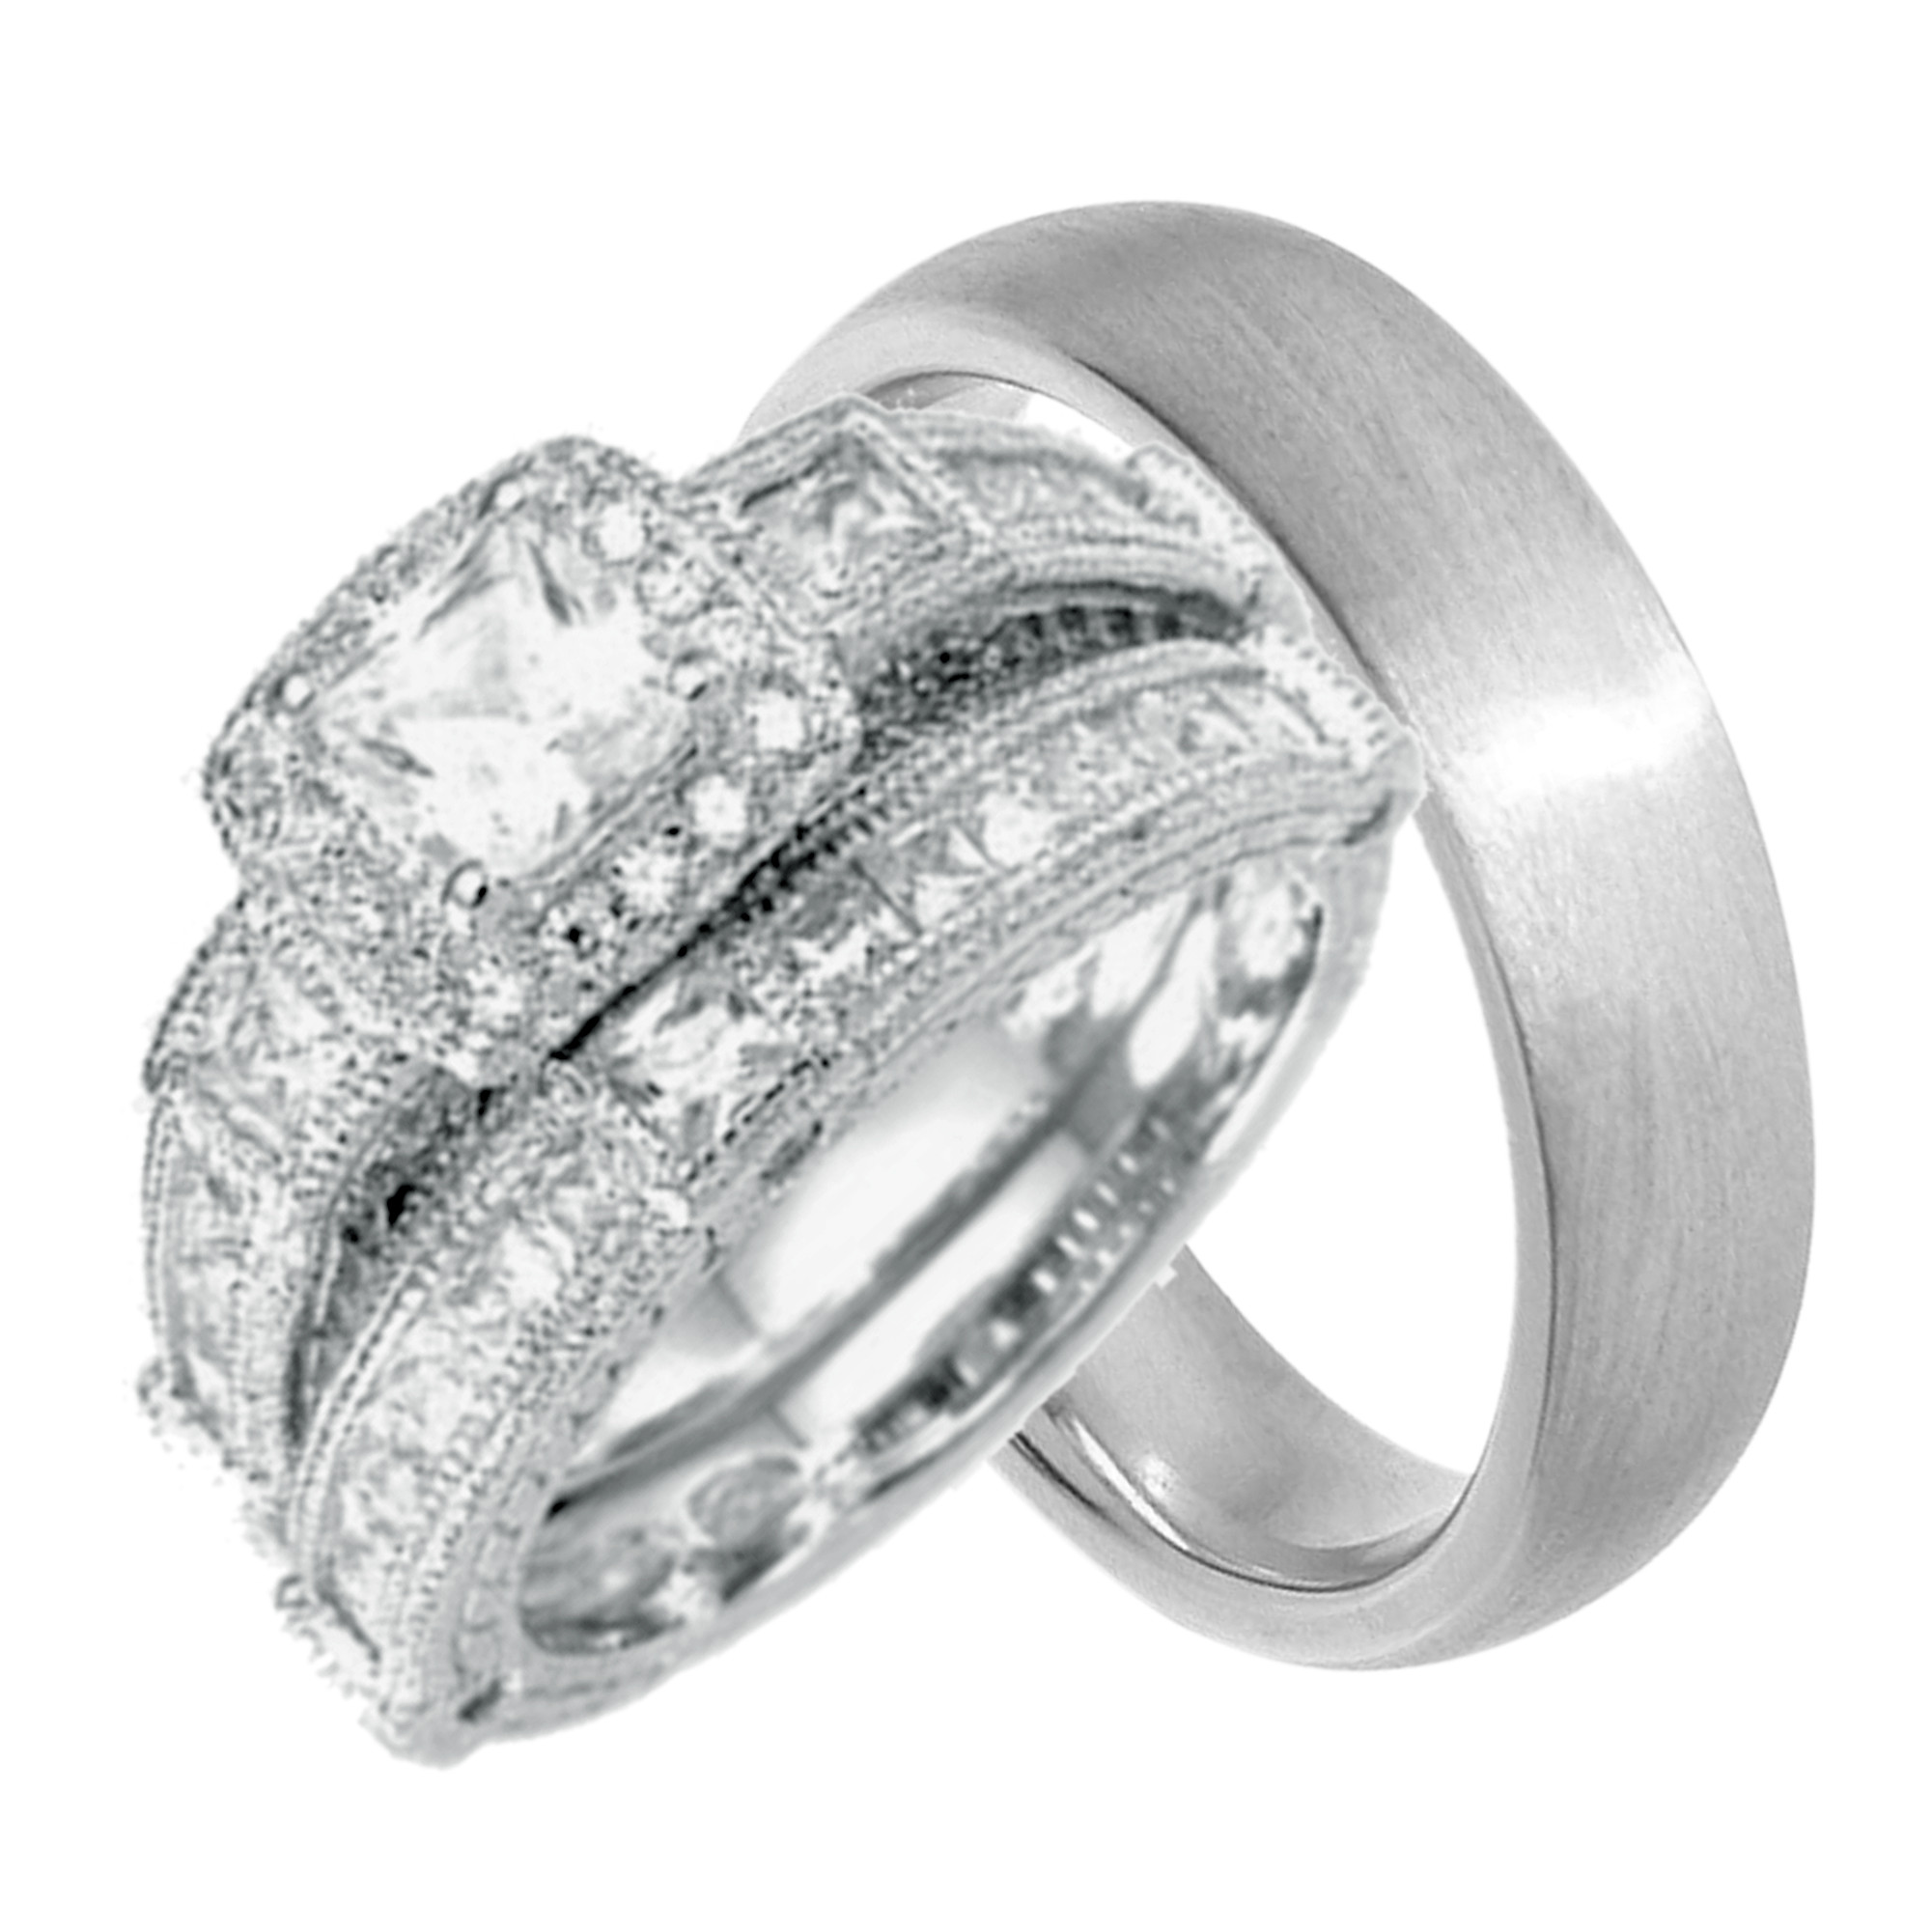 Cheap Wedding Band Sets His And Hers
 LaRaso & Co His and Hers Wedding Ring Set Cheap Wedding